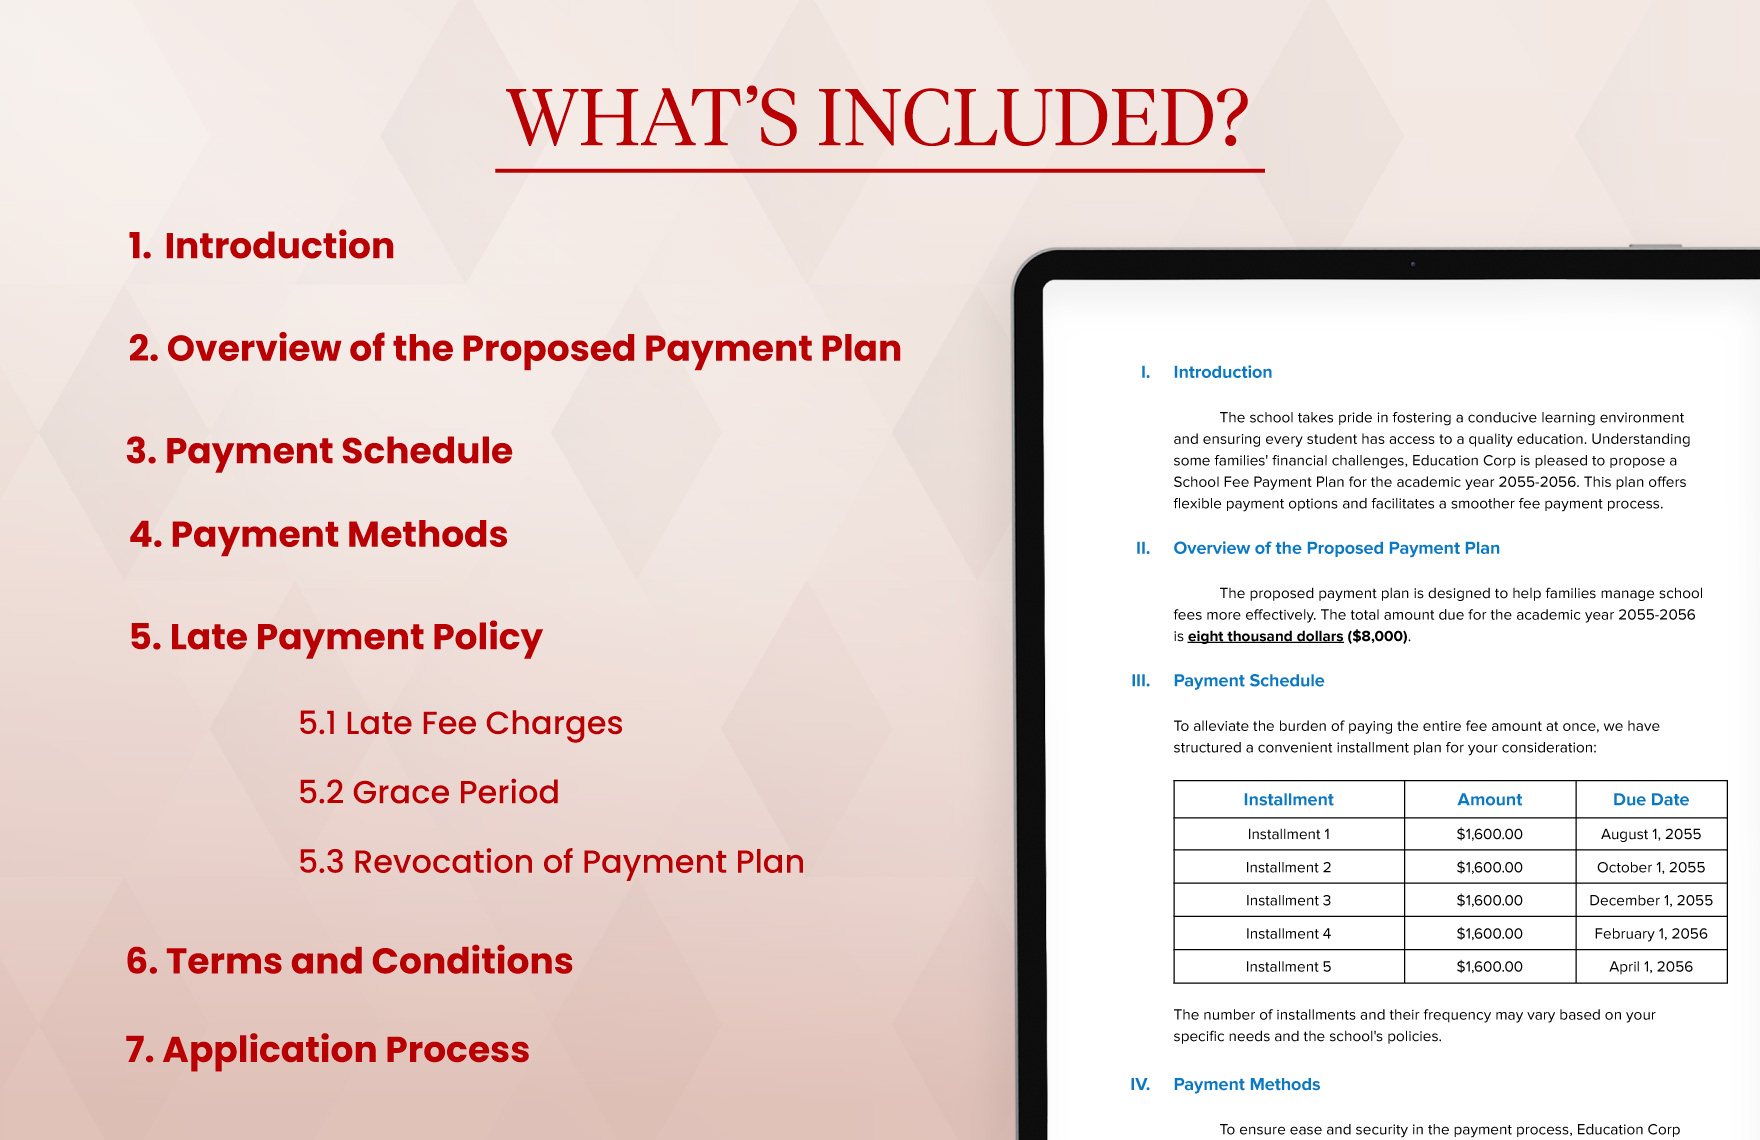 School Fee Payment Plan Proposal Template